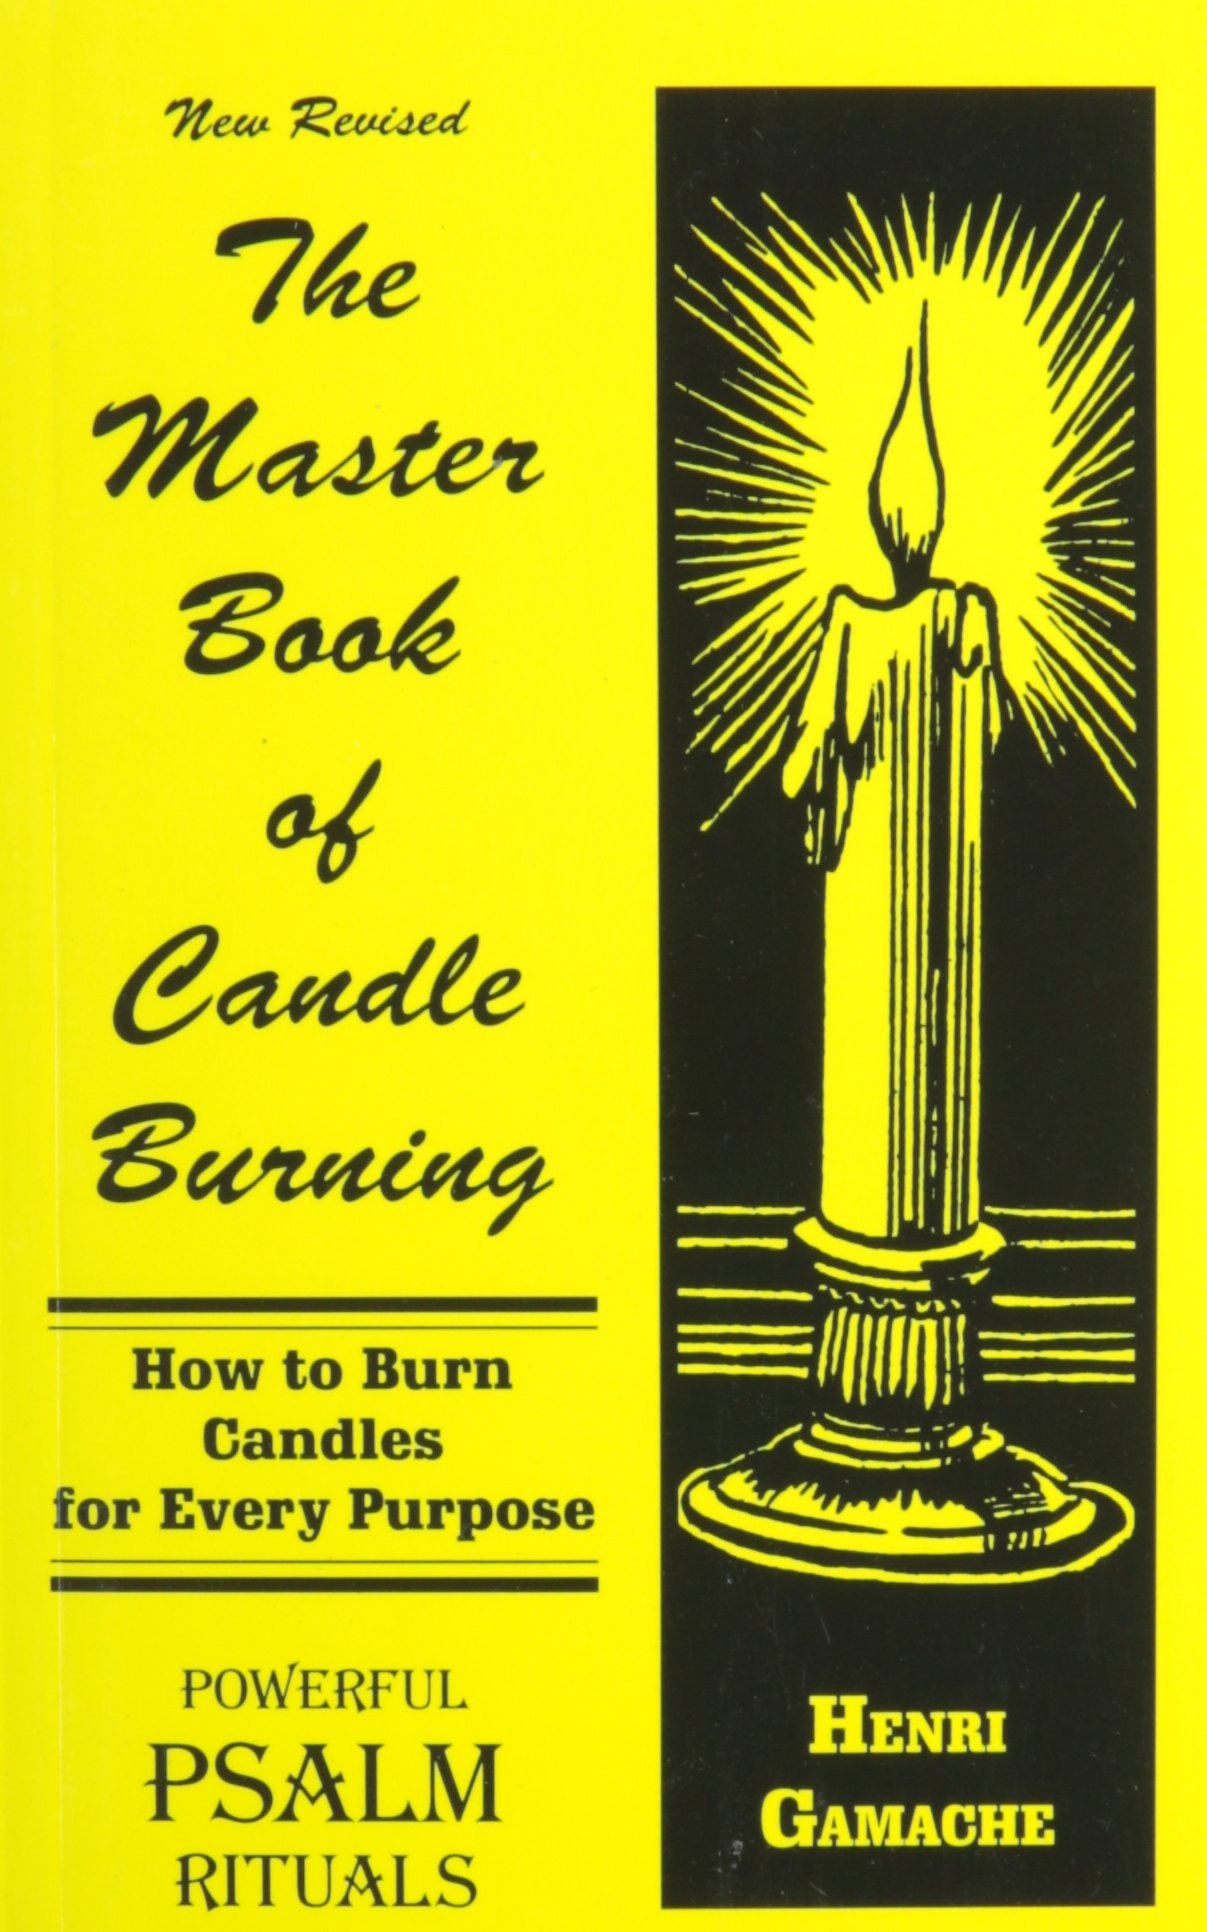 The Master Book Of Candle Burning: Or How To Burn Candles For Every Purpose